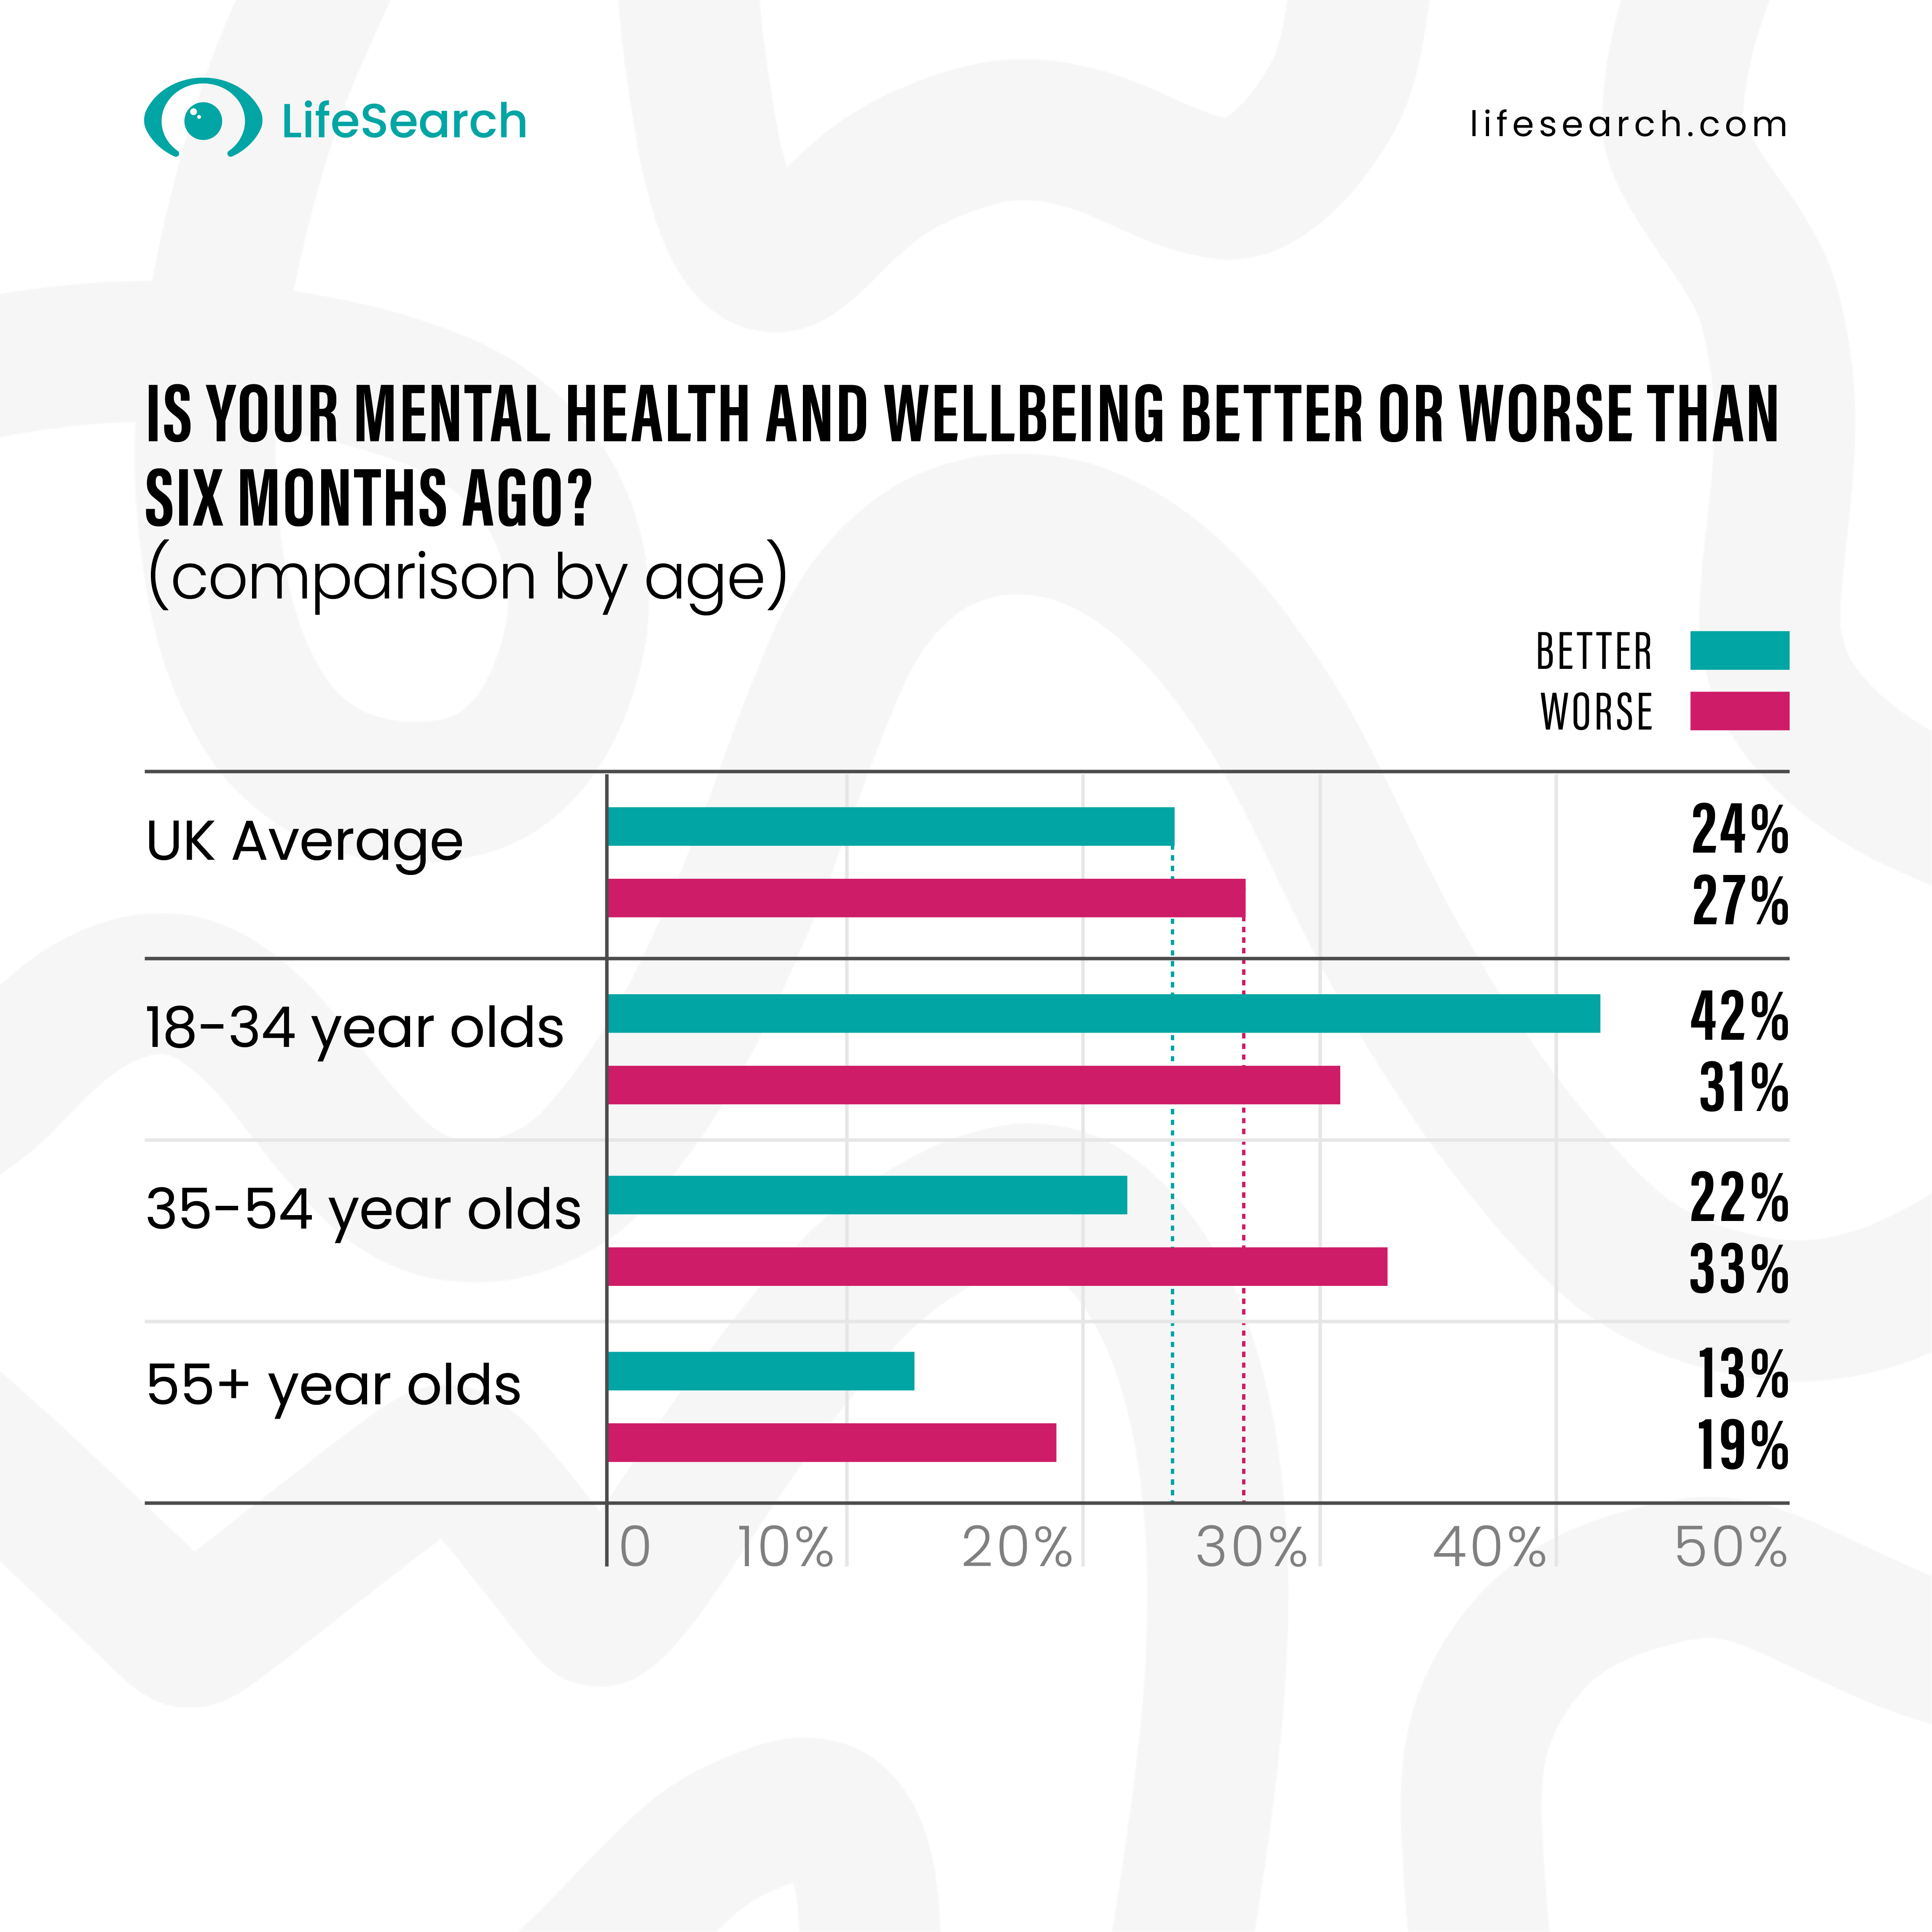 Table showing if mental health is better or worse than six months ago based on age